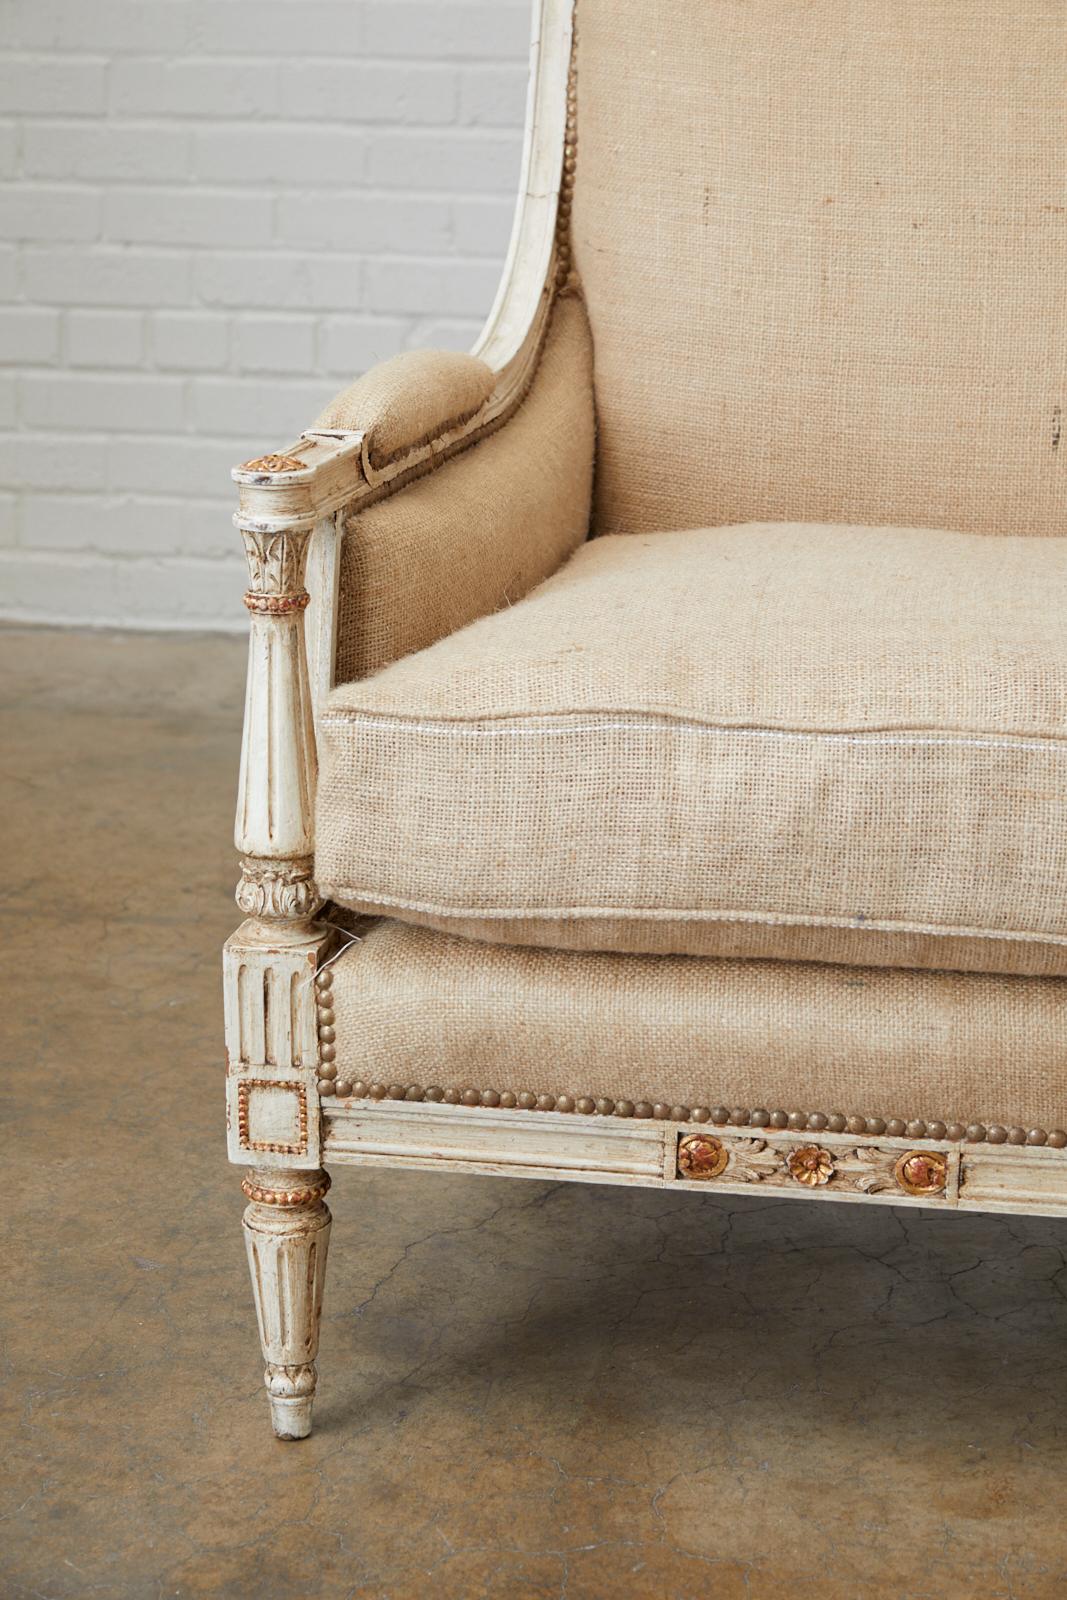 Stunning French painted settee or loveseat made in the Louis XVI Gustavian taste. Features a beautifully carved frame with neoclassical acanthus motifs. Each side has Directoire style column arm supports with a gilt rosette on the top. The flat